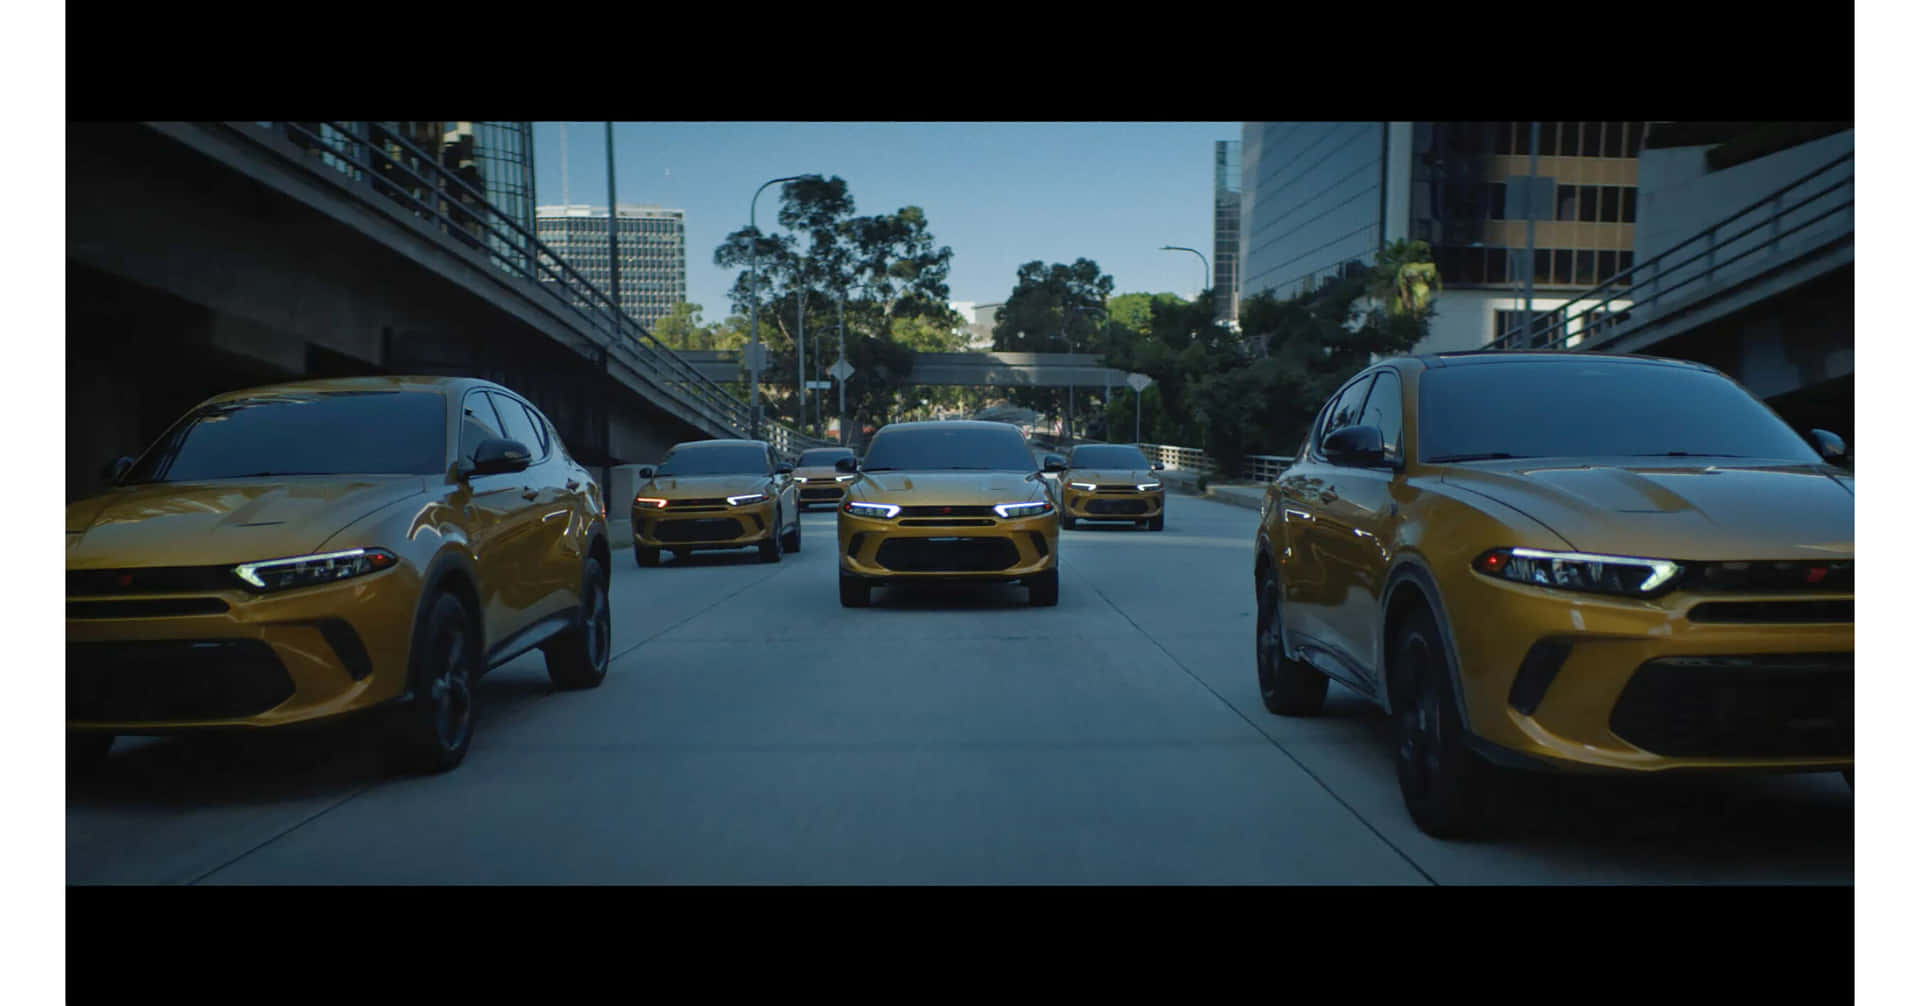 A Group Of Yellow Suvs Are Parked In A City